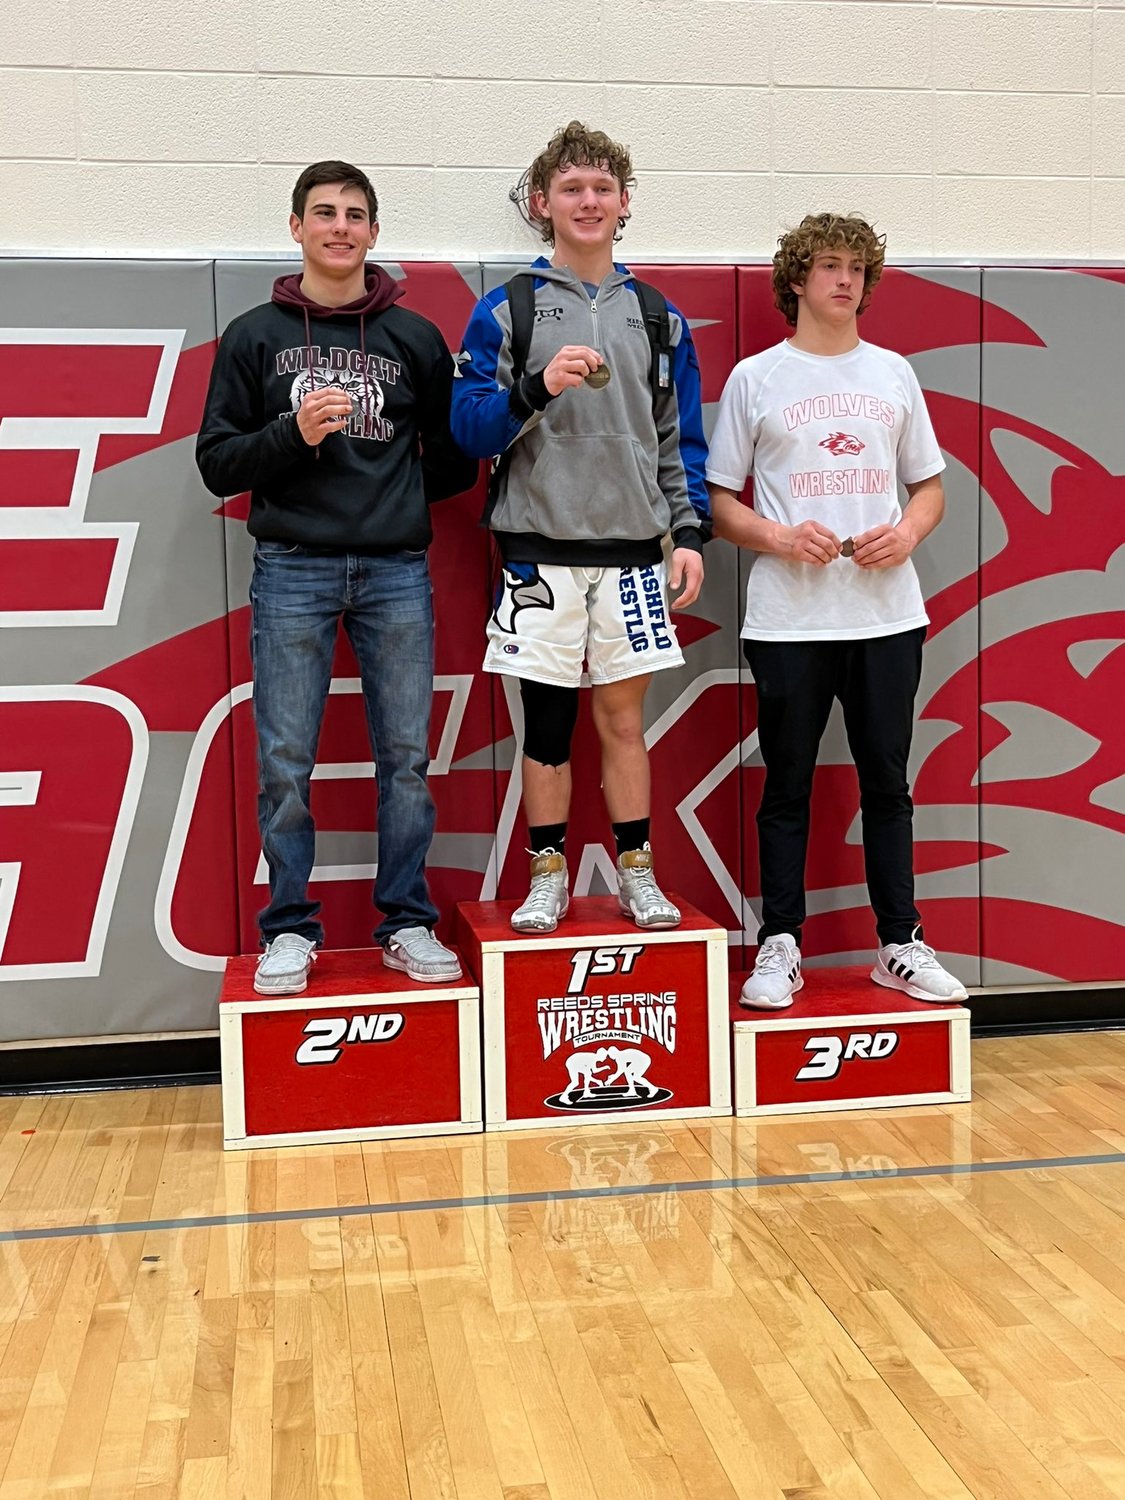 Kit Farran, for Rogersville taking the podium after his win in his weight class. Farran earned 2nd team honors at the tournament.